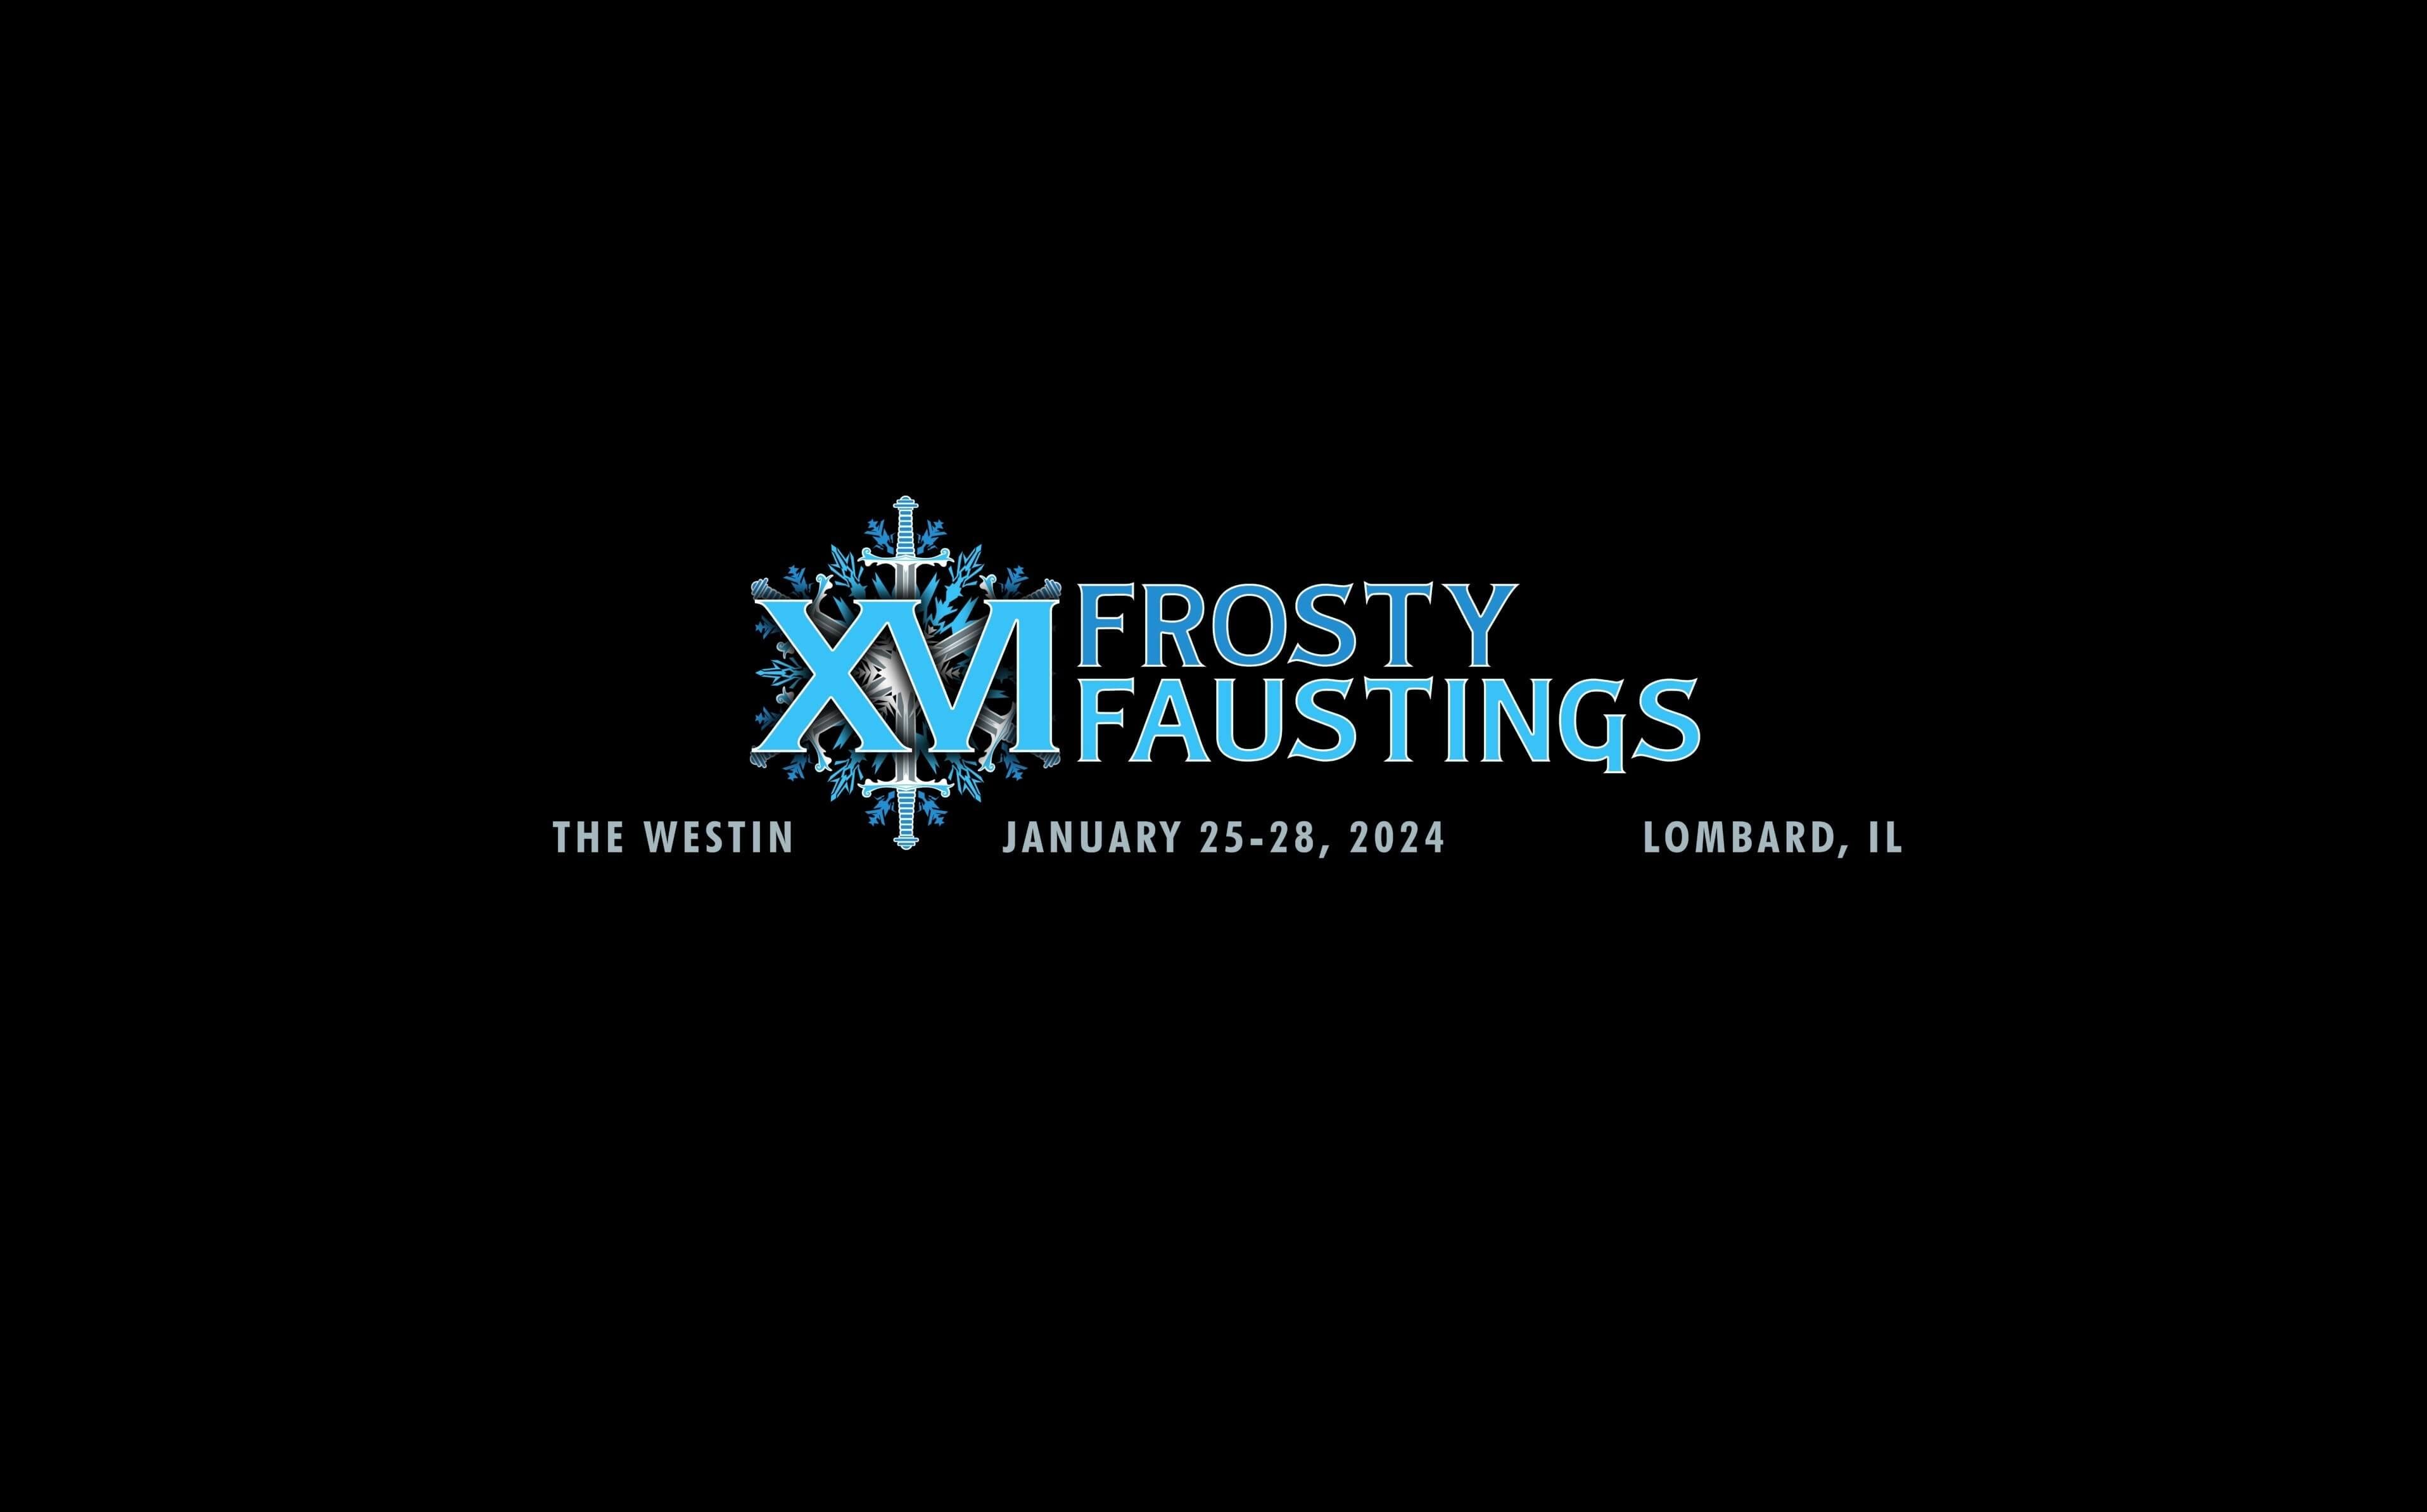 Frosty Faustings XVI 2024 Schedule Revealed